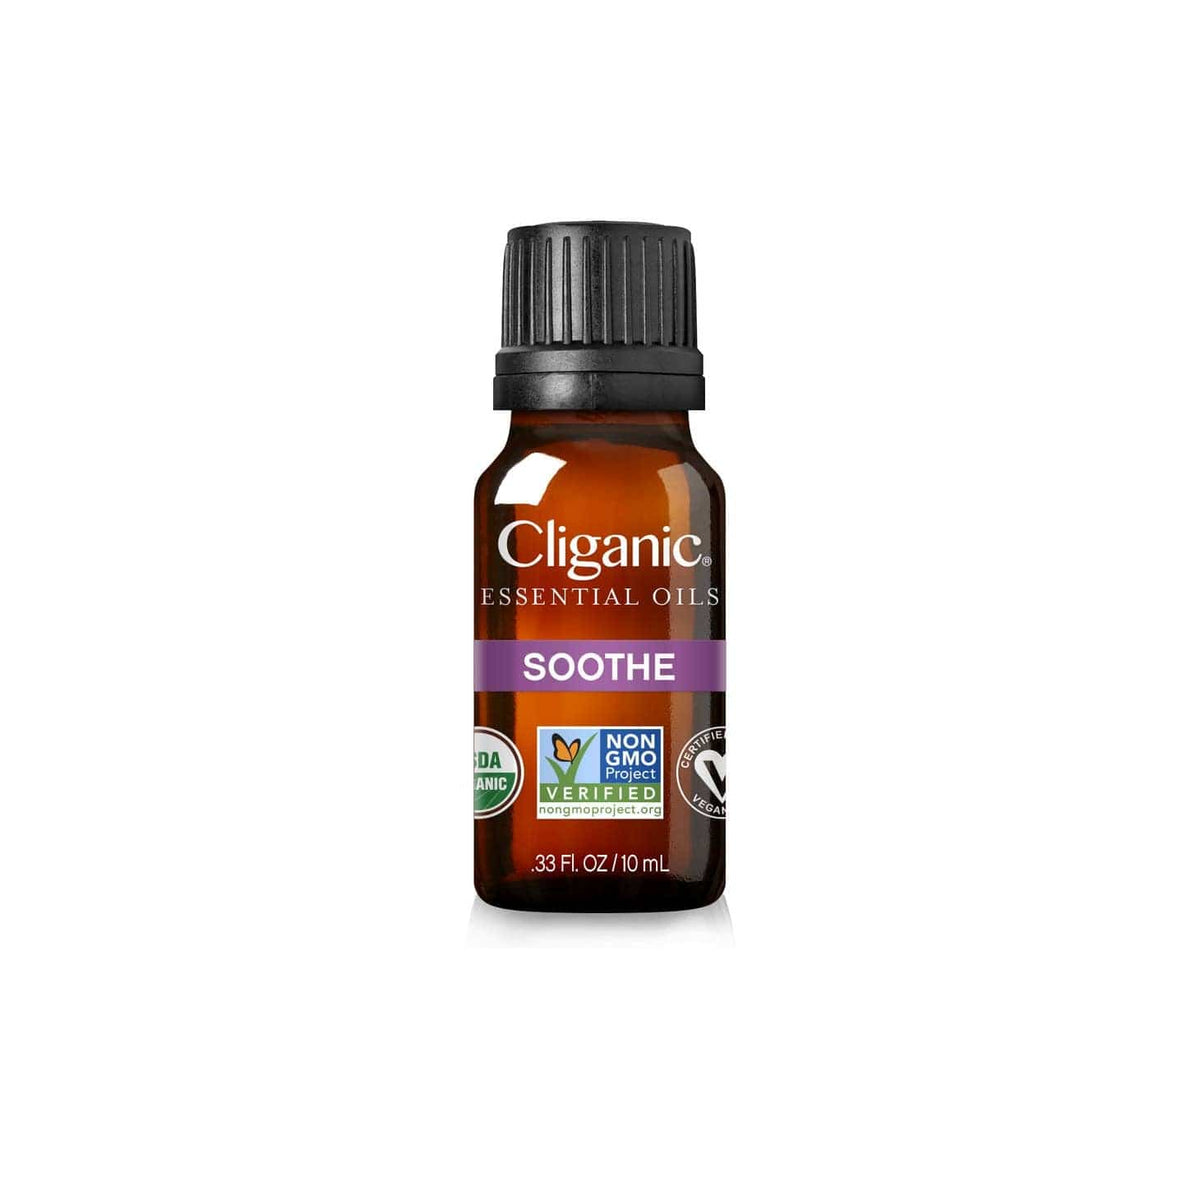 Cliganic Soothe Essential Oil Blend